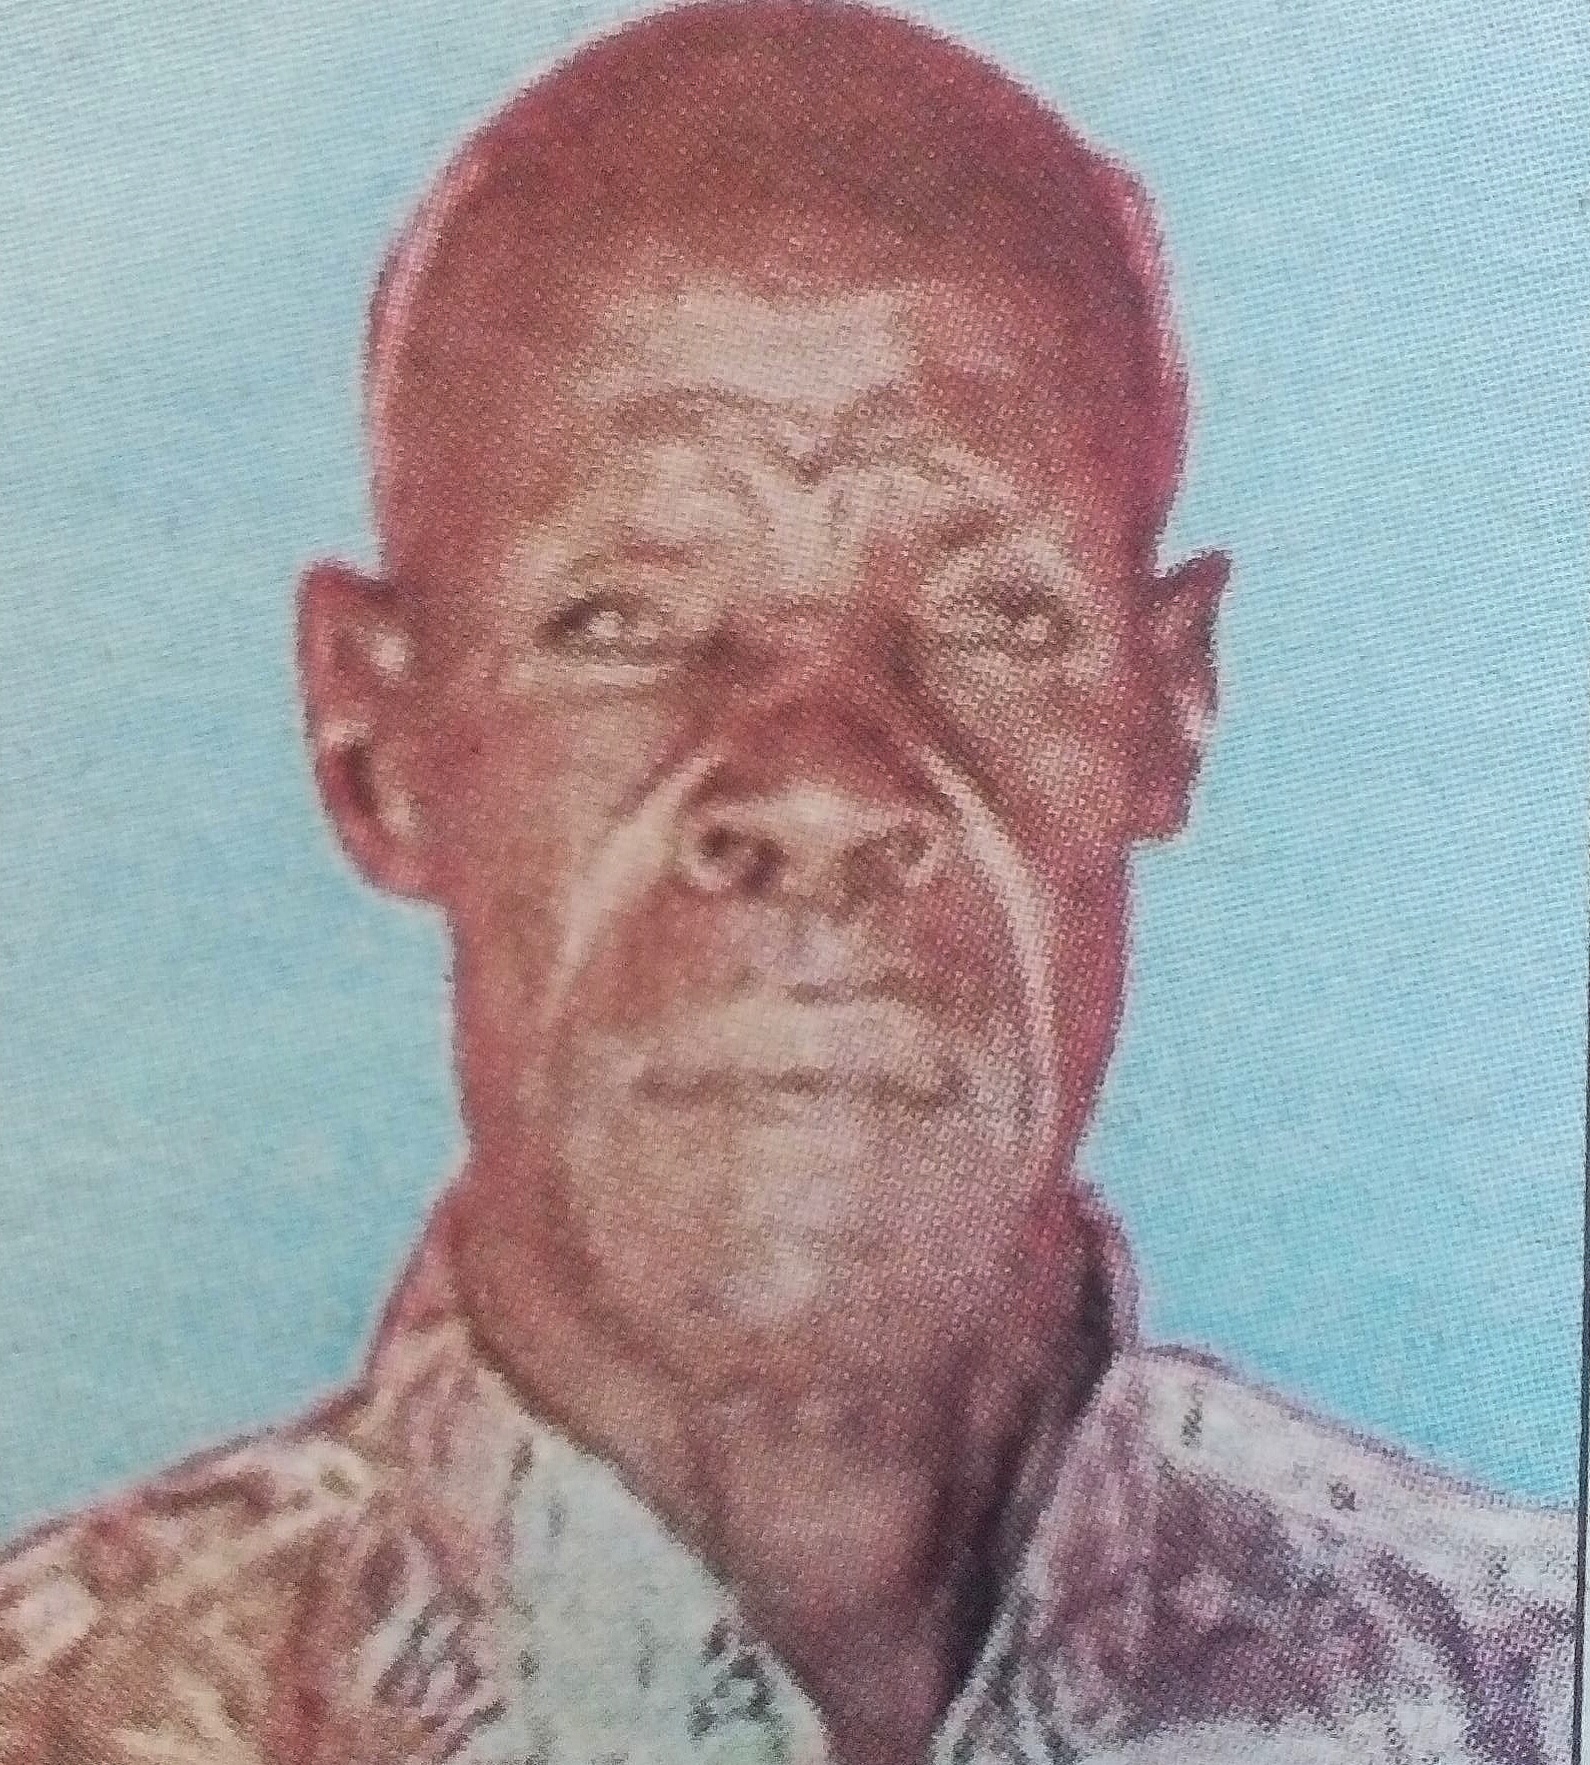 Obituary Image of Mzee Norbert Ong’ong‘e Oduor